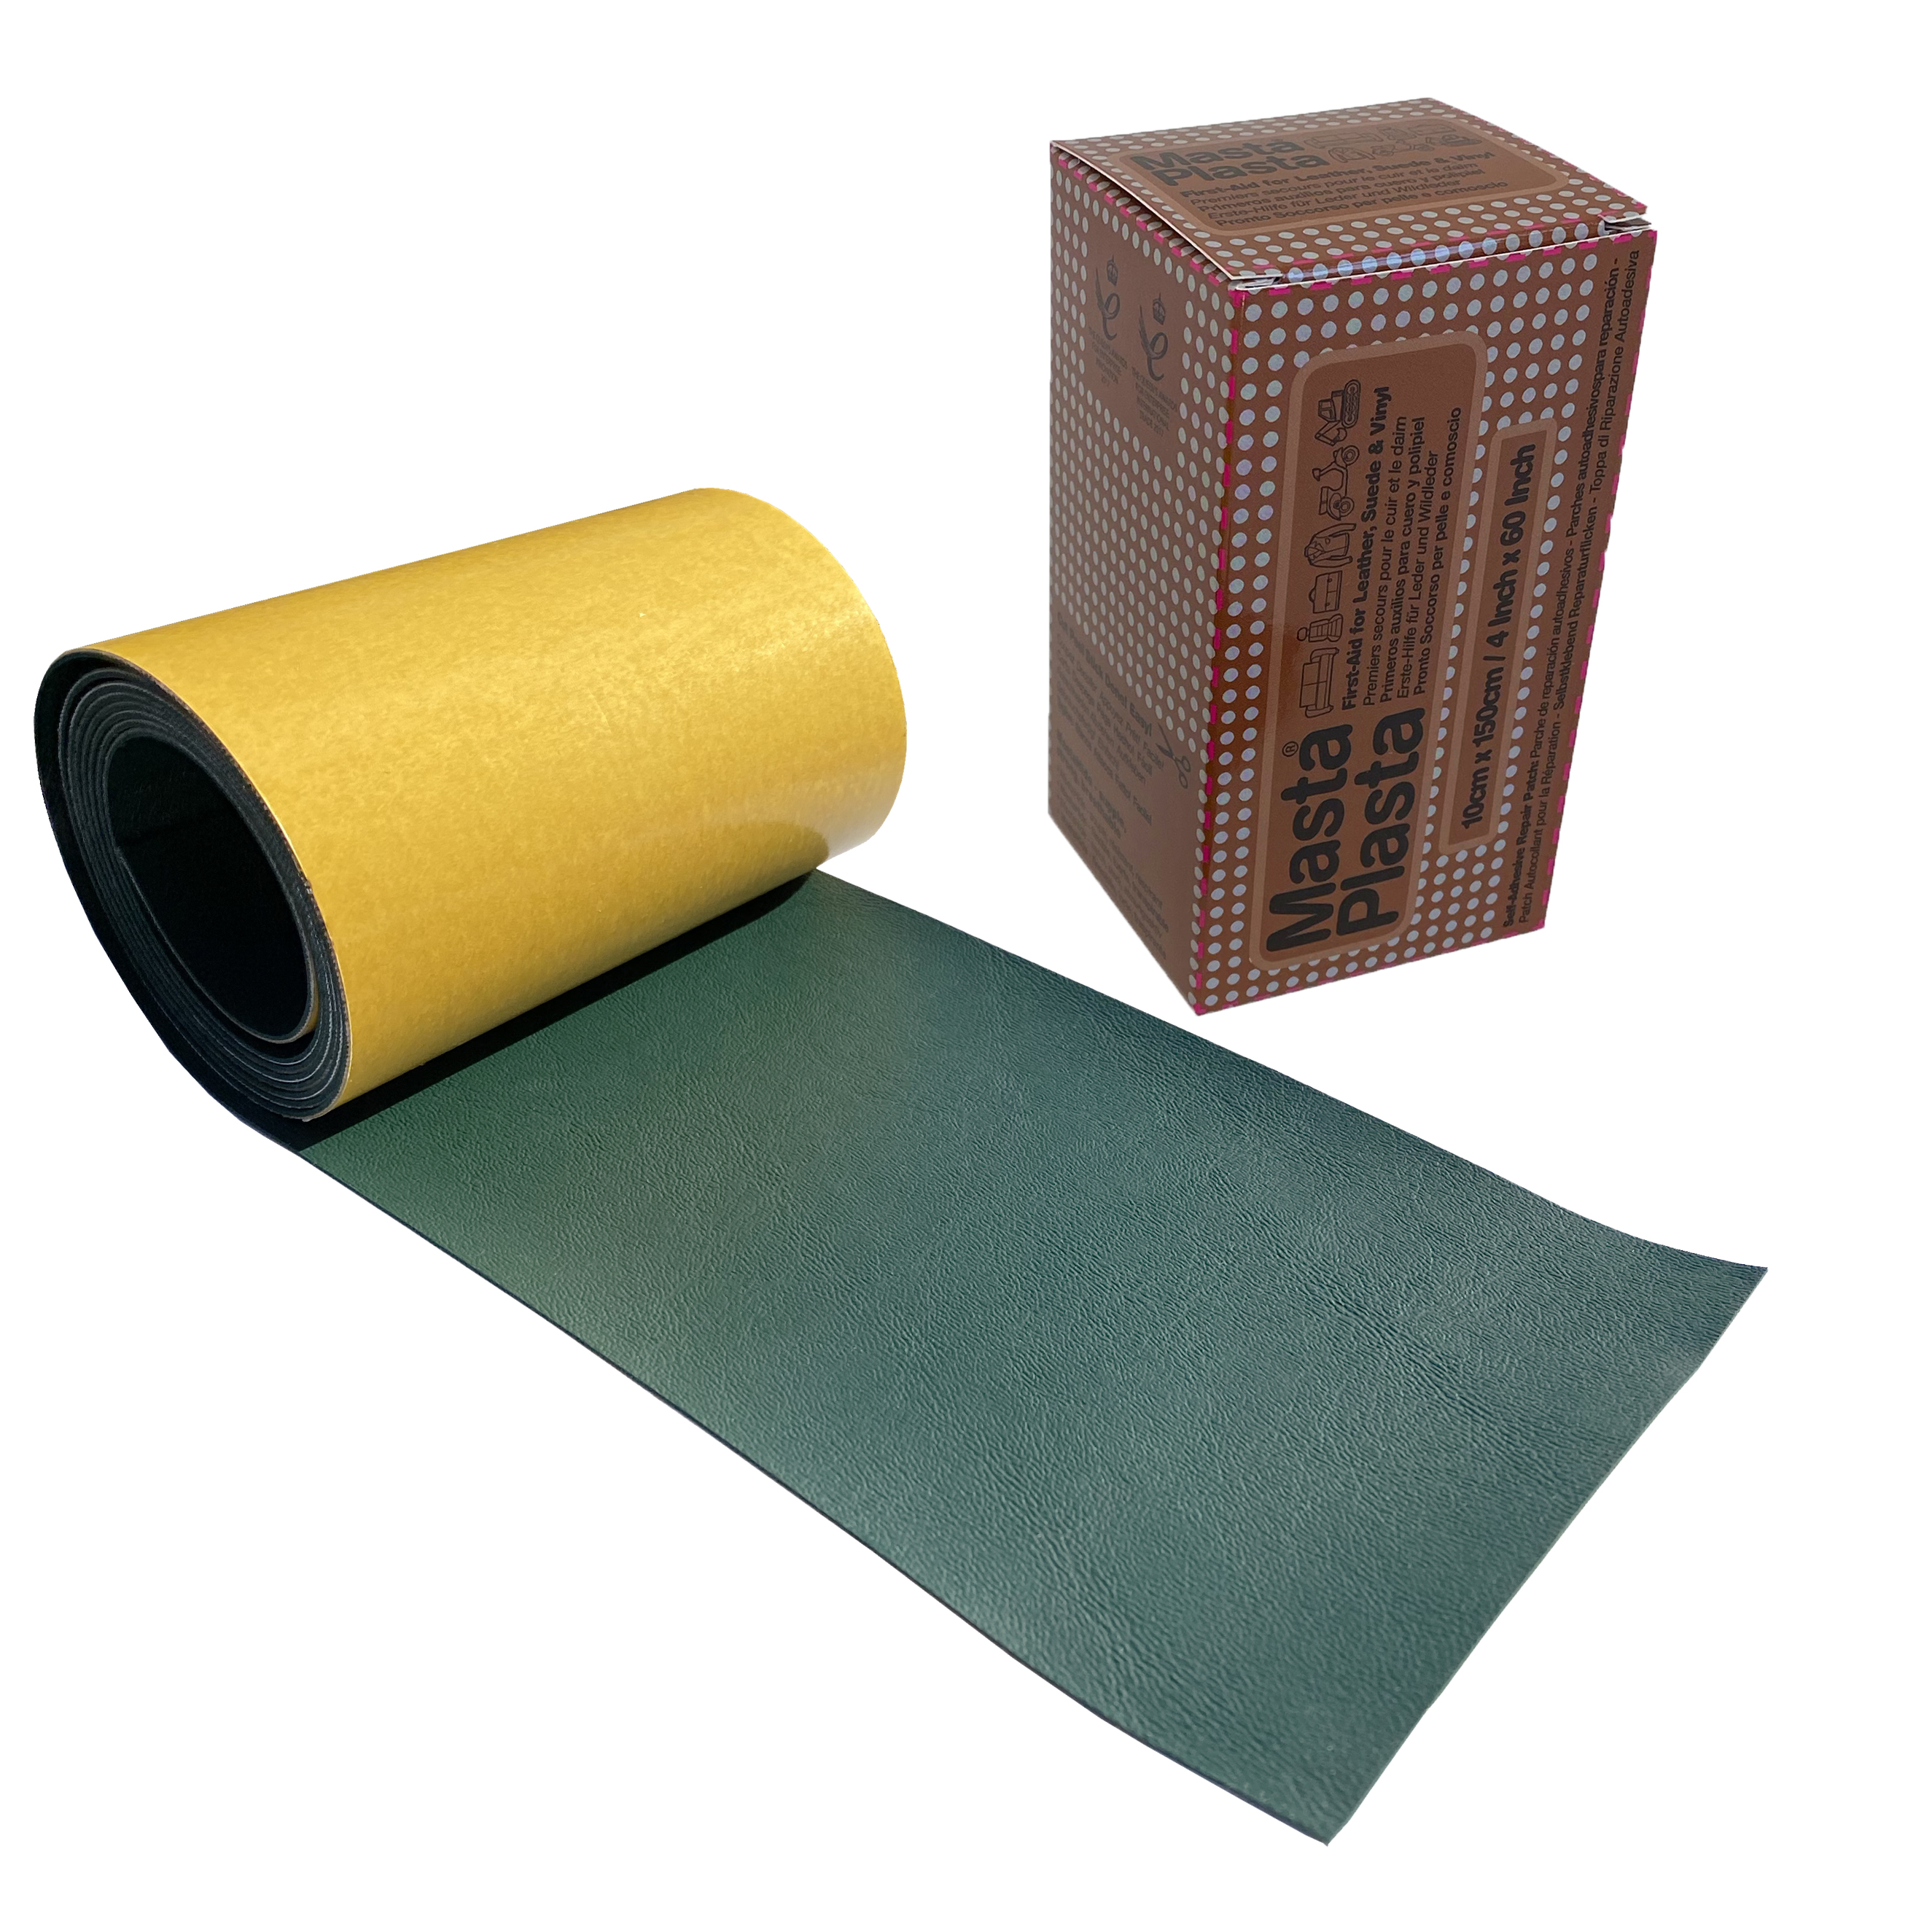 MastaPlasta Instant Leather Repair Tape Green 60 x 4 in (150cm x 10cm). Self-Adhesive Repair for Sofas, Chairs, Car Seats, Bags and More. Fast, Easy